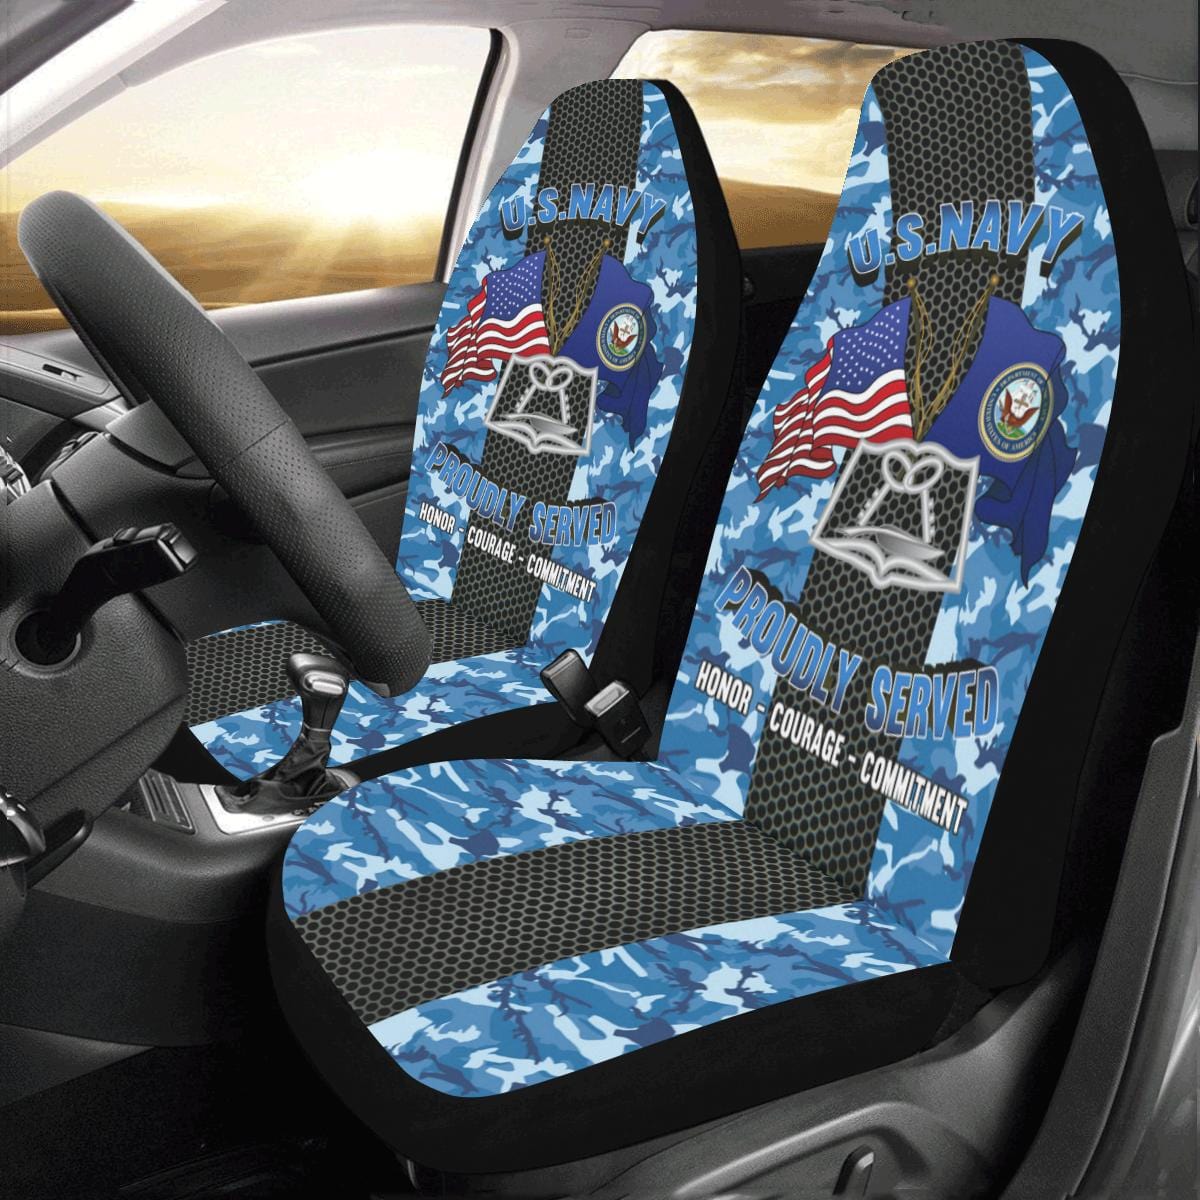 Navy Mess Management Specialist MS Navy CS Car Seat Covers (Set of 2)-SeatCovers-Navy-Rate-Veterans Nation